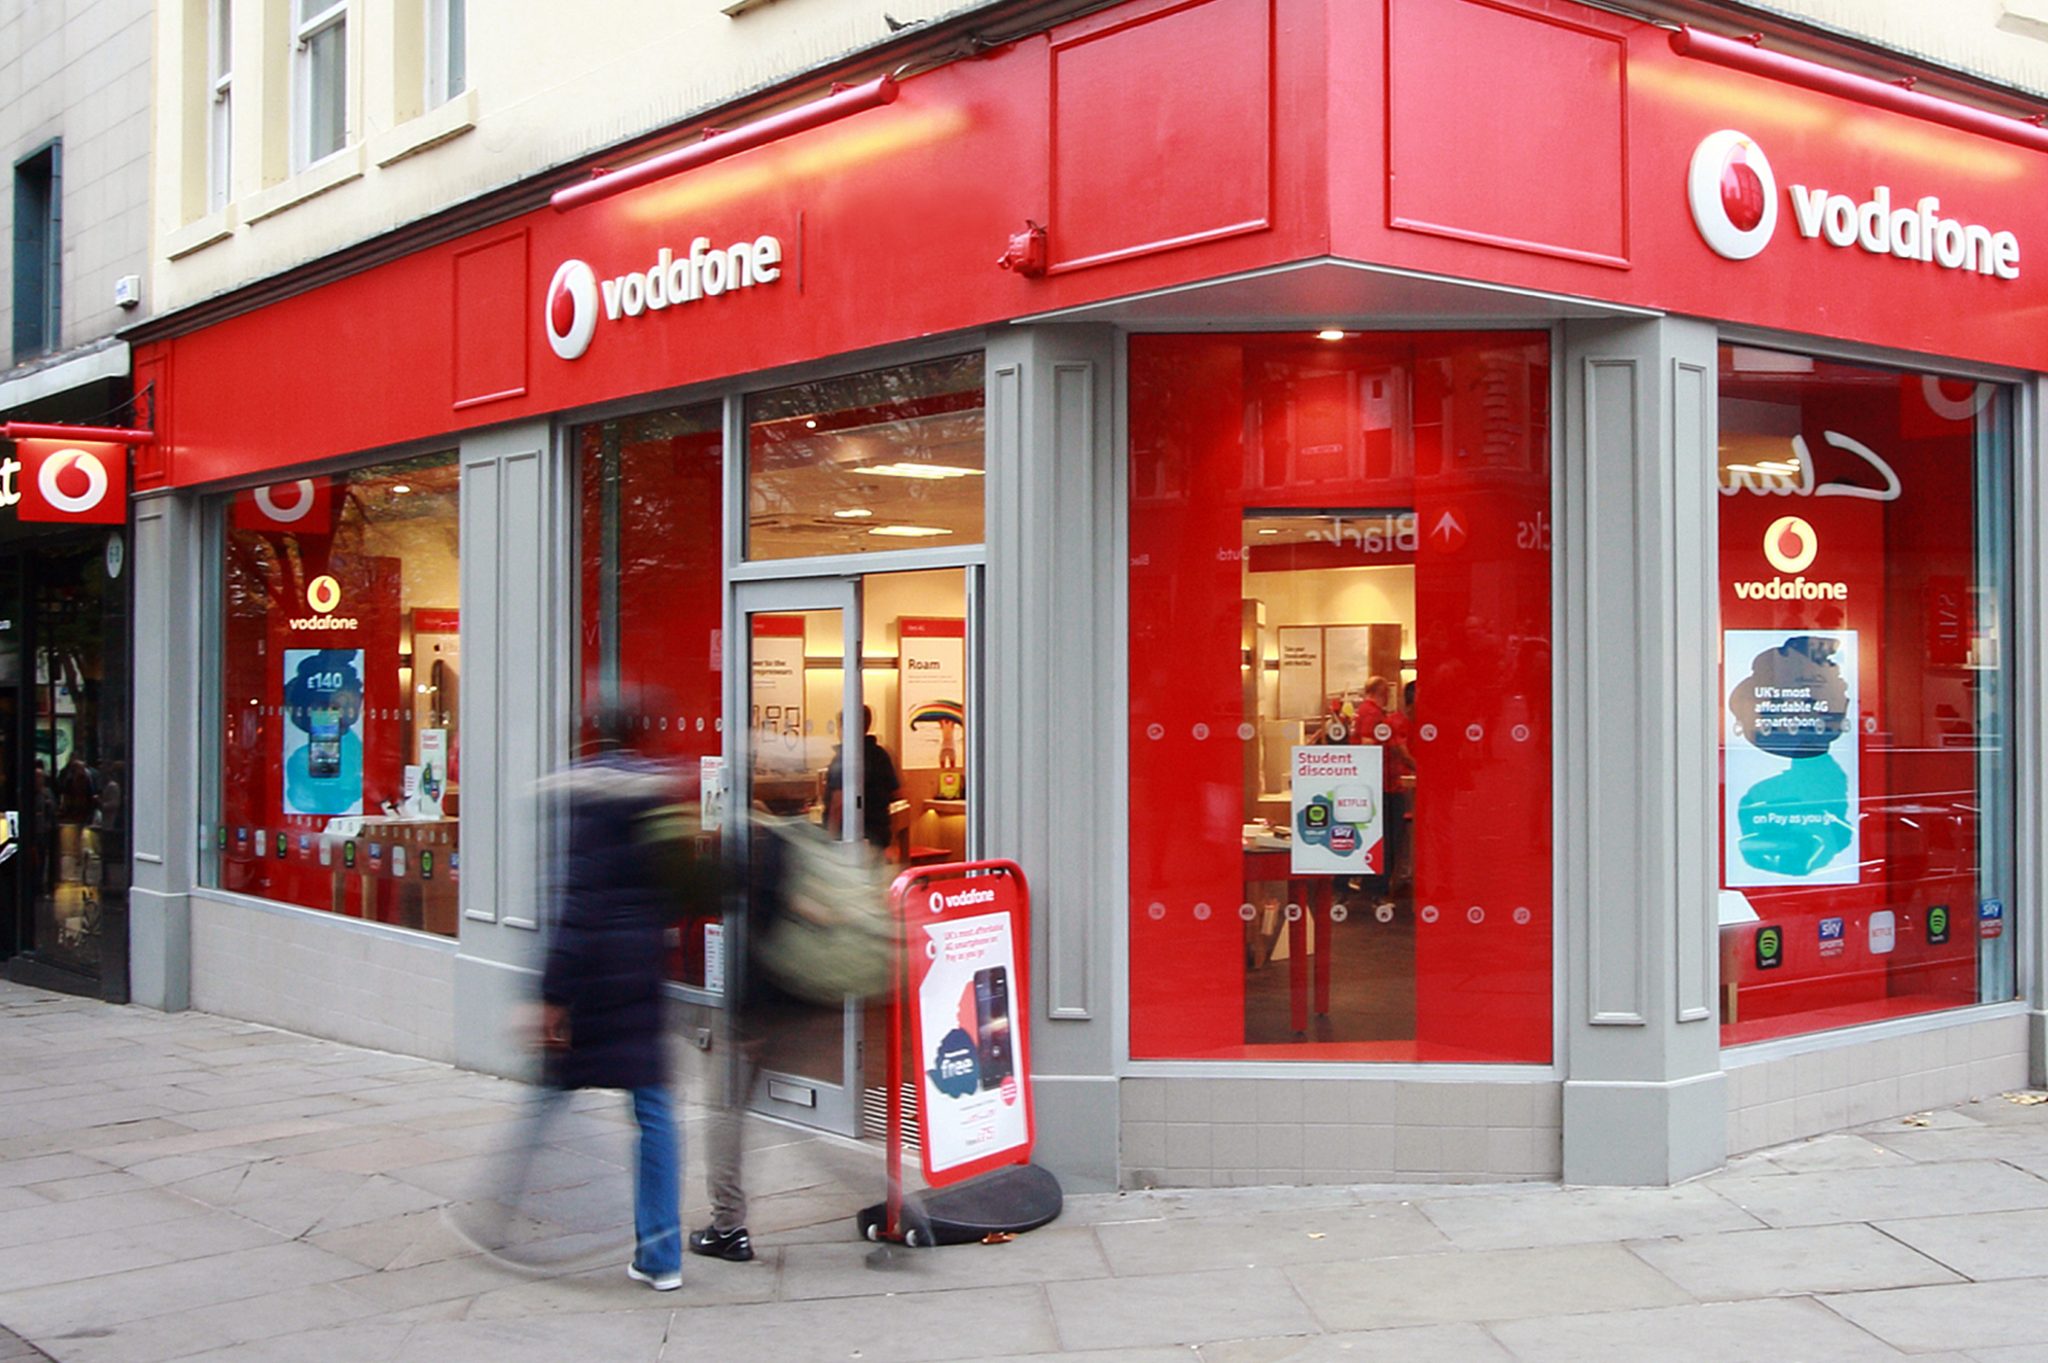 Vodafone faces backlash as customers experience network issues